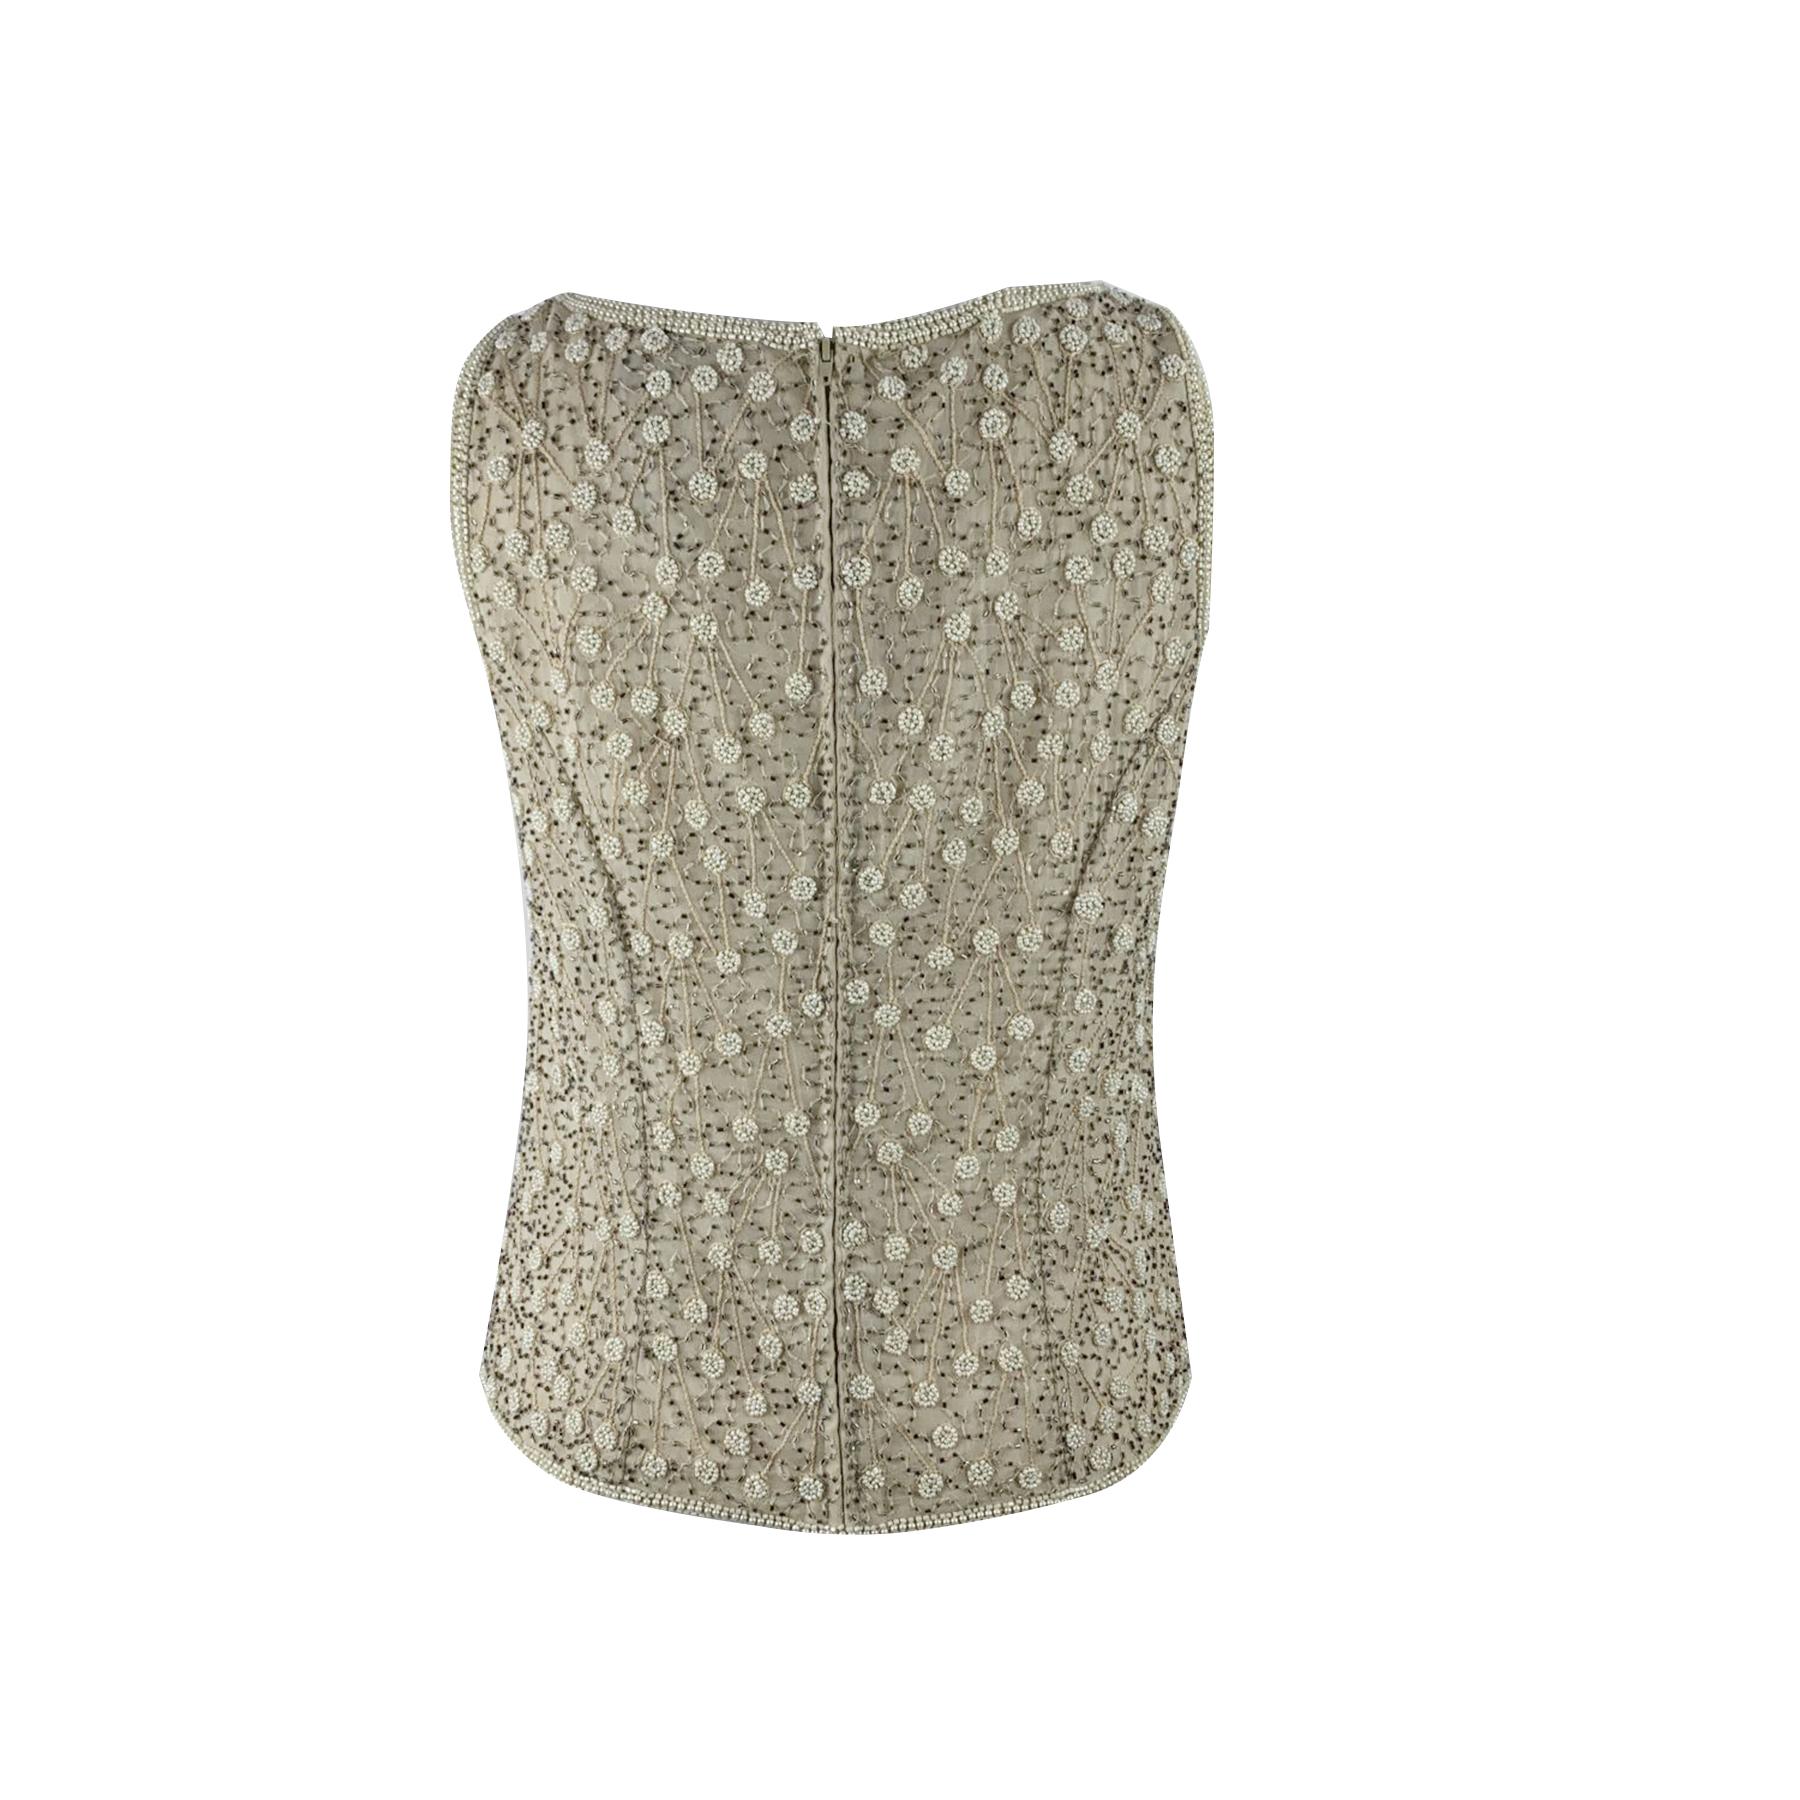 Beautiful Adrianna Papell beaded sleeveless top. Beige color. Full back zip. Composition: 100% Silk. Made in India. Size: 10 US (it should correspond to a SMALL/MEDIUM size)

Details

MATERIAL: Silk

COLOR: Beige

MODEL: Top

GENDER: Women

COUNTRY